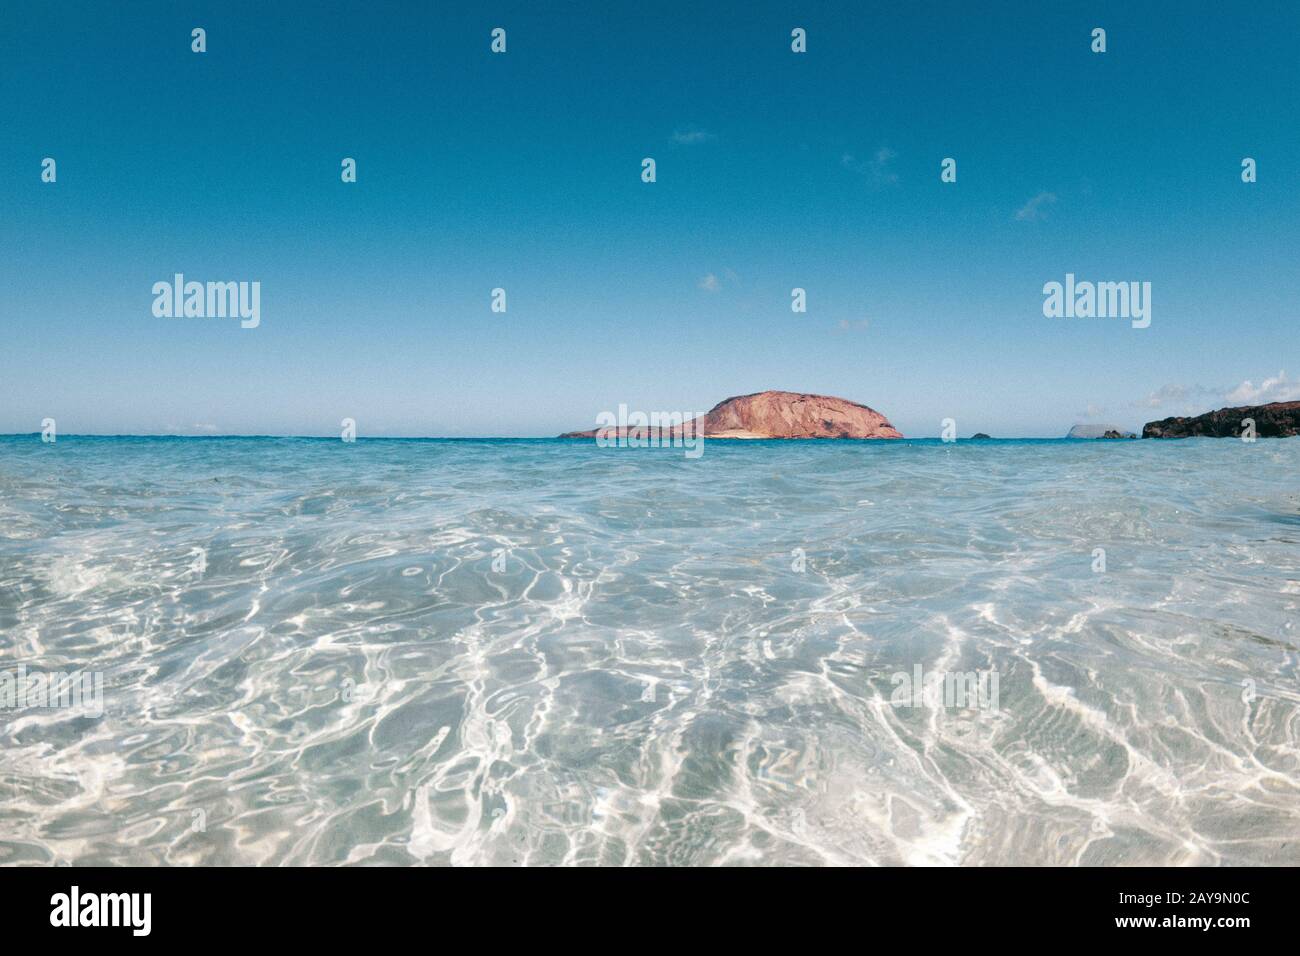 Beach day in the Canary Islands Stock Photo